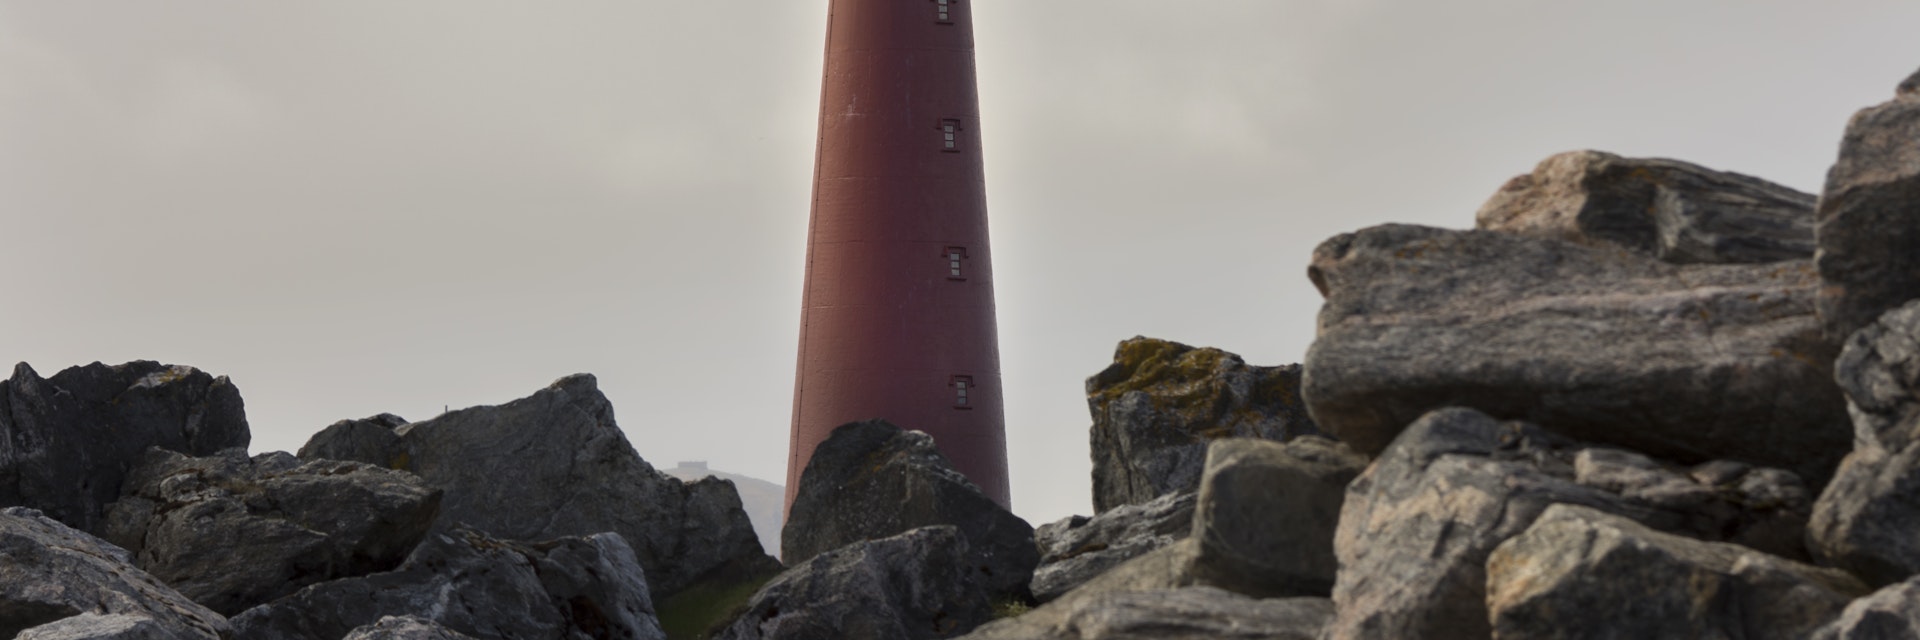 Red lighthouse in Andenes.
